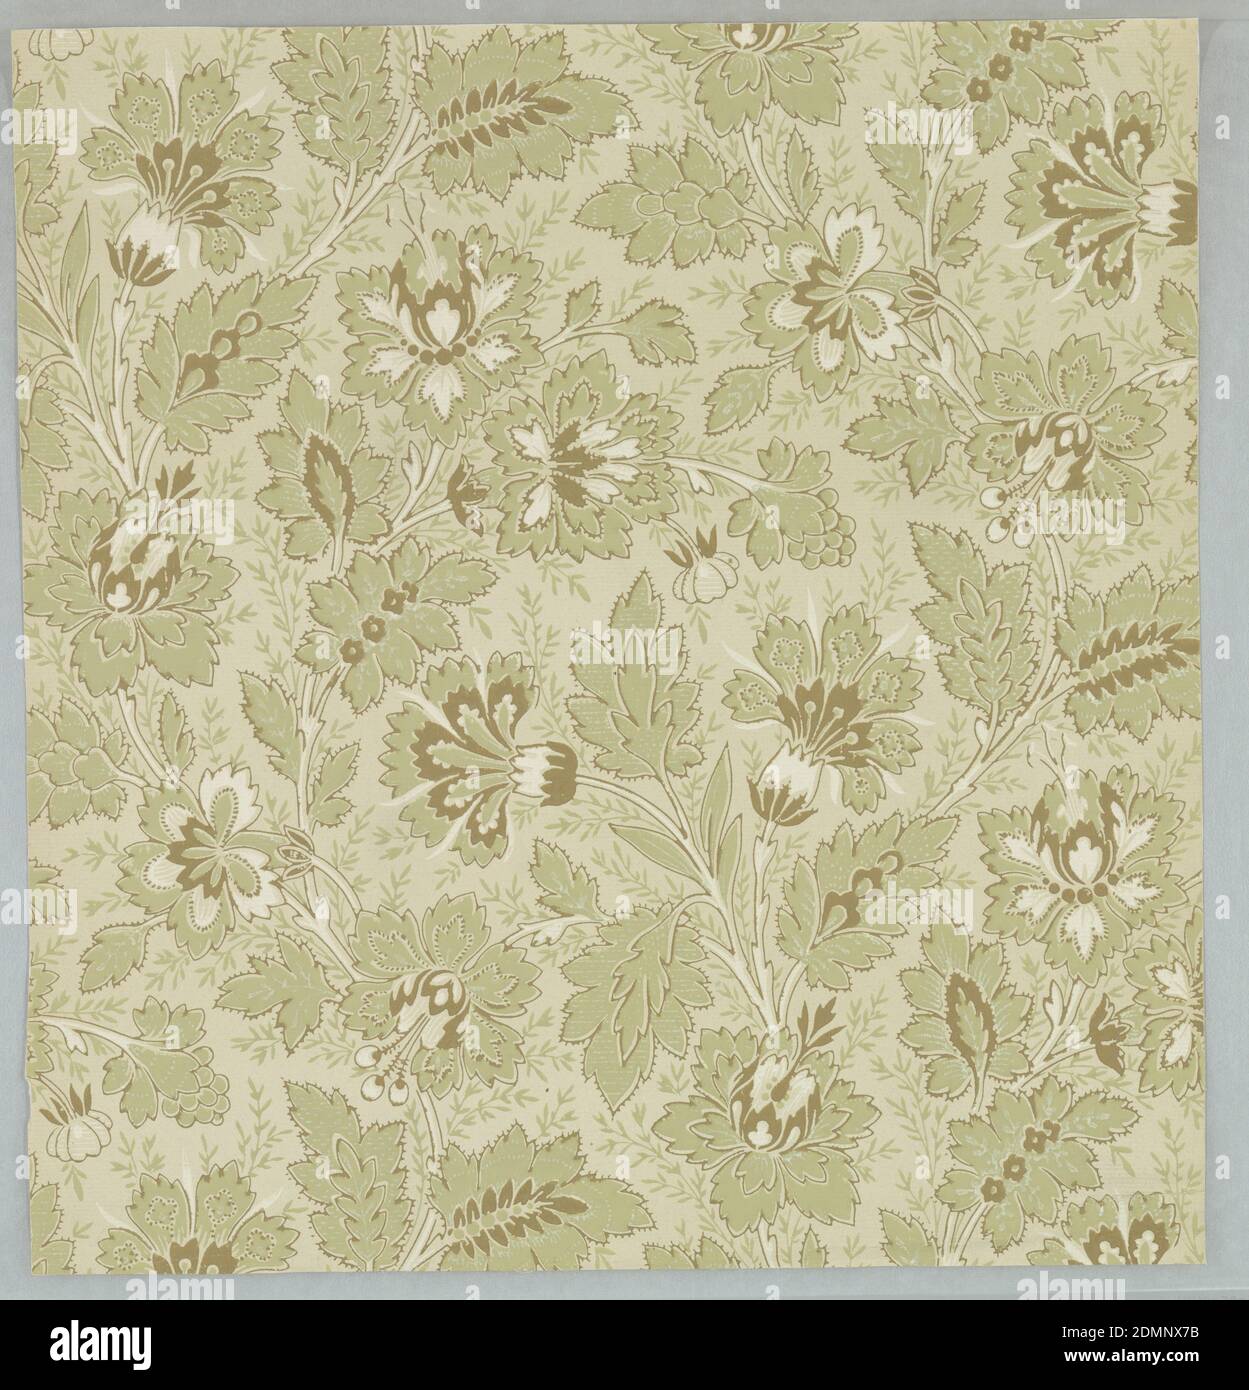 Sidewall, Machine-printed paper, Aesthetic style design of dense all-over foliage with large fanciful bellflowers; single-motif, long vertical repeat in off-set columns; color scheme of light green, brown, and white with brown outlining; pale tan ground., USA, ca. 1880, Wallcoverings, Sidewall Stock Photo